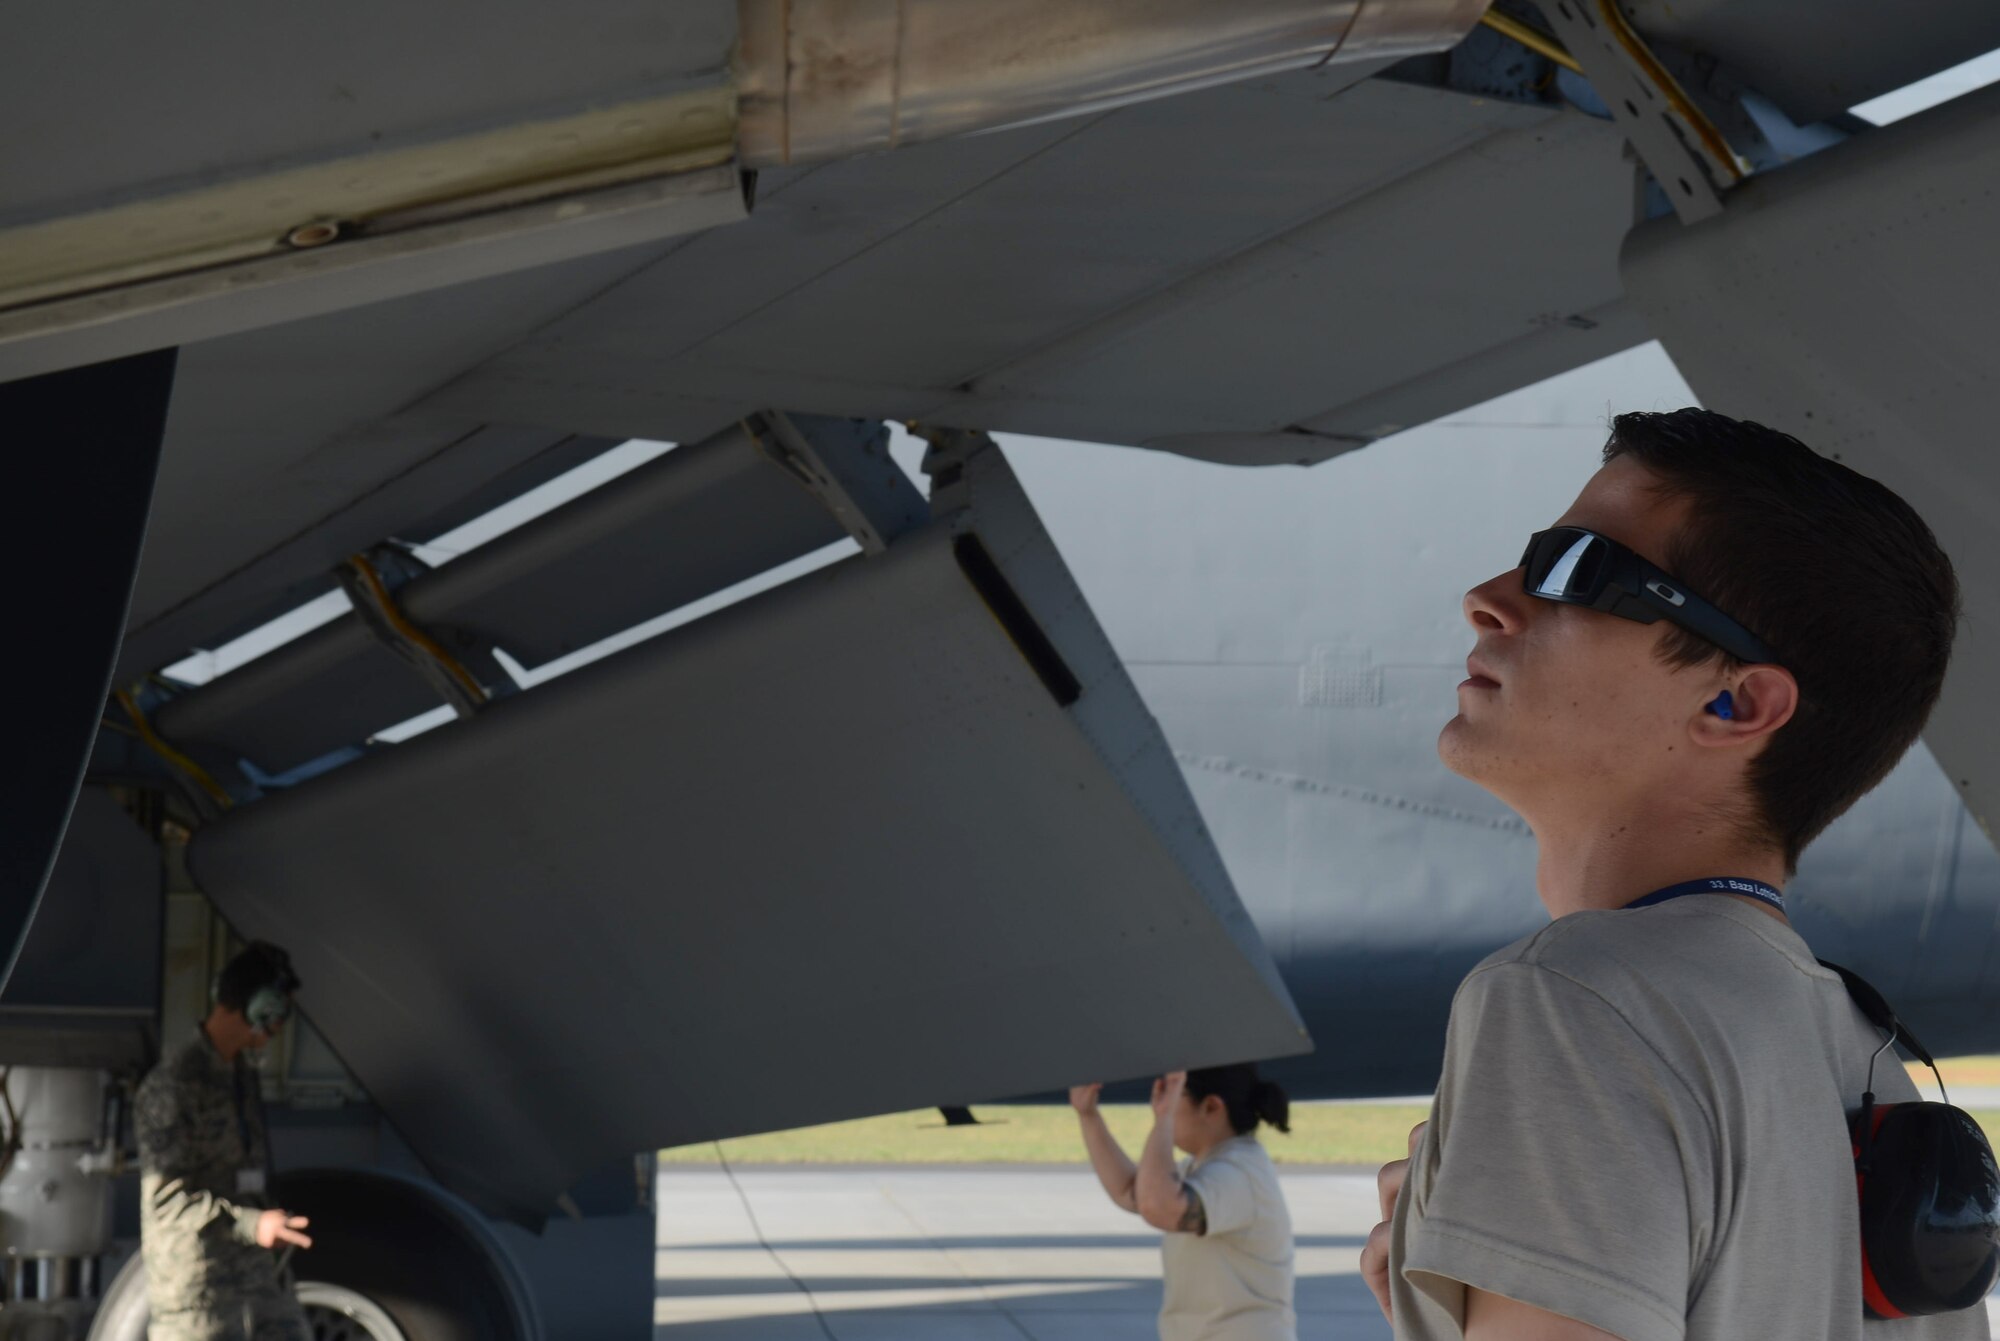 U.S. Air Force Senior Airman Alex Fletcher, 351st Expeditionary Air Refueling Squadron-Poland aerospace propulsion journeyman from Bradenton, Fla., inspects a KC-135 Stratotanker before a Baltic Operations Exercise flight June 11, 2014, on Powidz Air Base, Poland. Fletcher is one of 10 maintainers assigned to the 351st EARS-Poland ensuring the KC-135 is safe and mission ready. (U.S. Air Force photo/Airman 1st Class Kyla Gifford/Released)